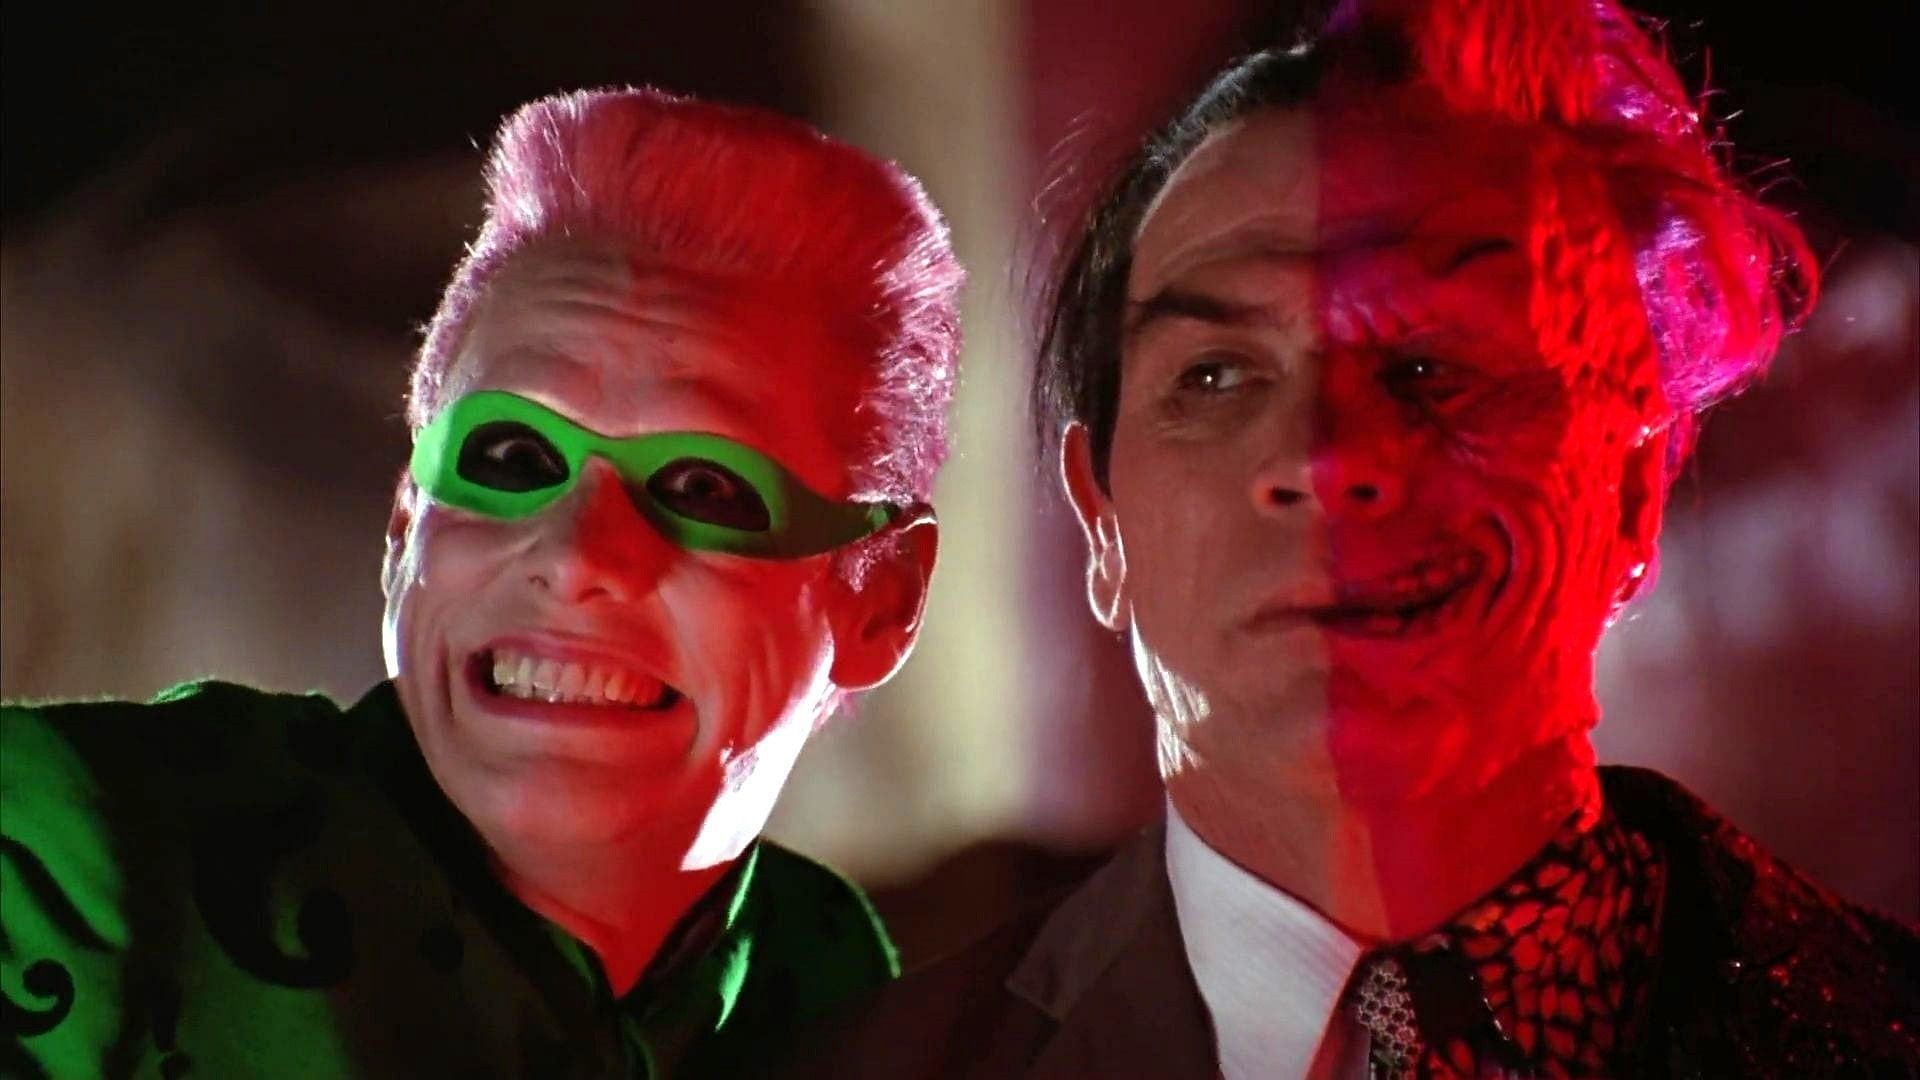 Jim Carrey as Riddler and Tommy Lee Jones as Two-Face (Image via WB Pictures/DC)